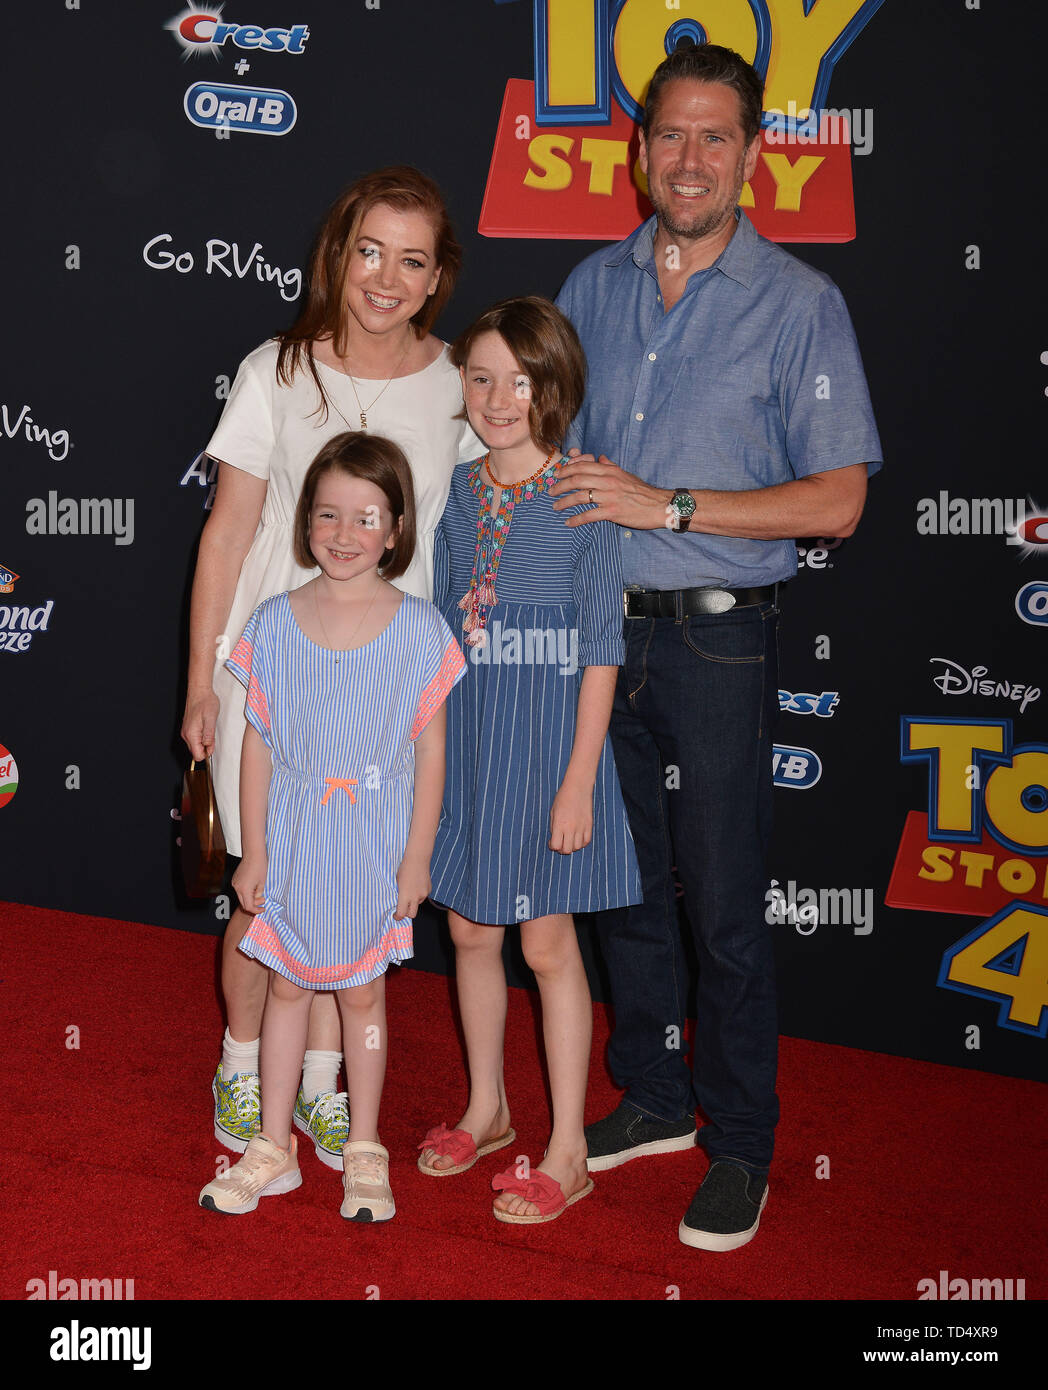 Los Angeles, USA. 11th June, 2019. Alyson Hannigan, Alexis Denisof, Saty,  Keeva arrives at the premiere of Disney and Pixar's "Toy Story 4" on June  11, 2019 in Los Angeles, California. Credit: